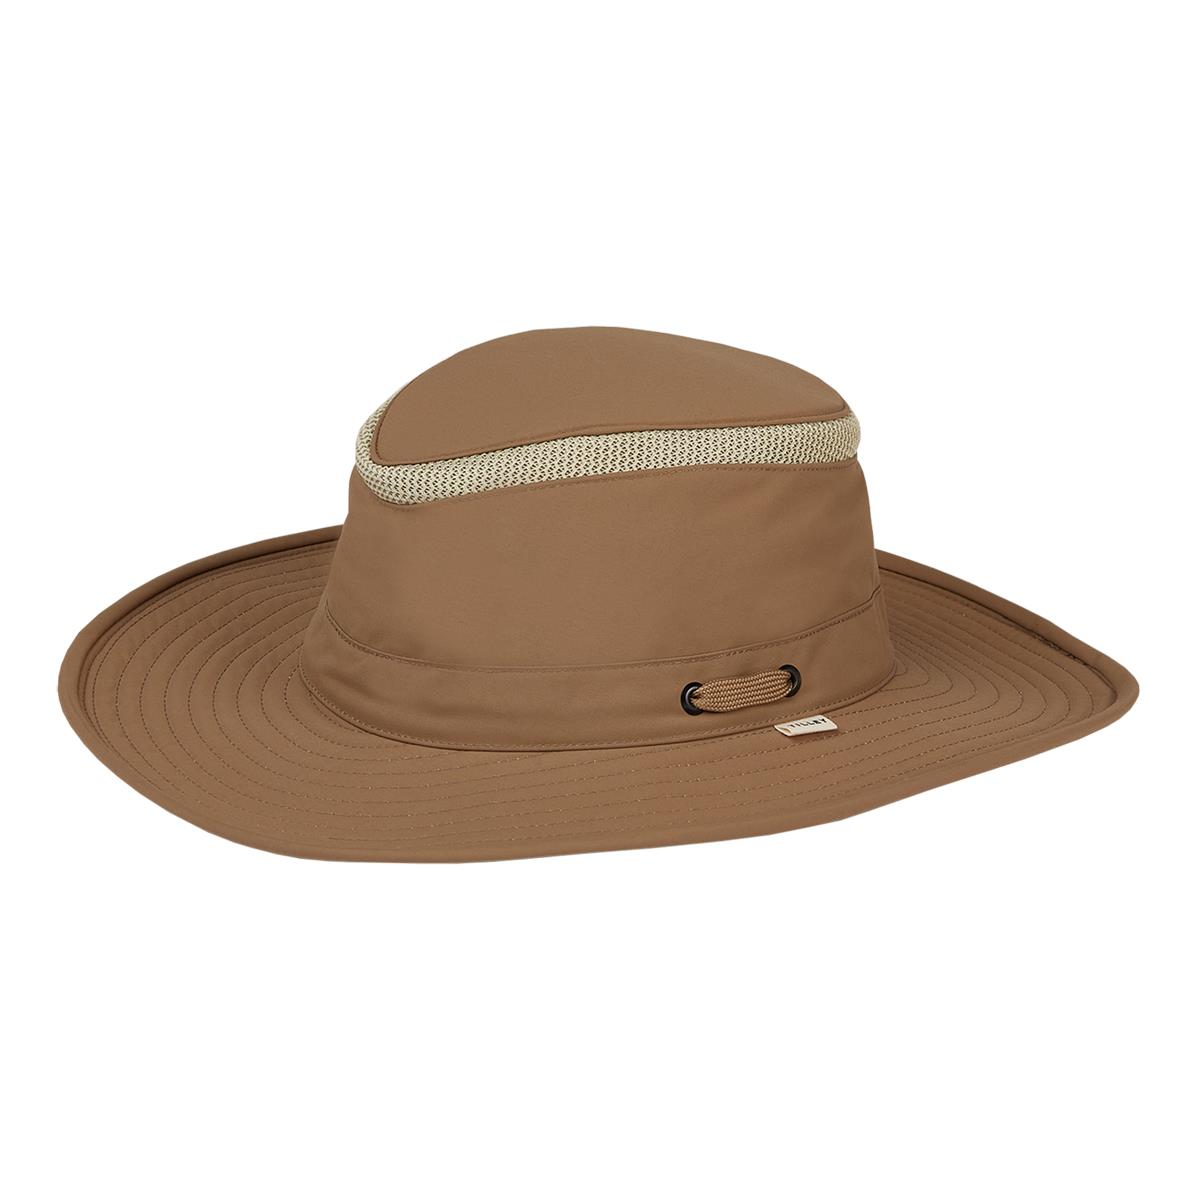 How does the Tilley Airflo Hat ensure coolness?